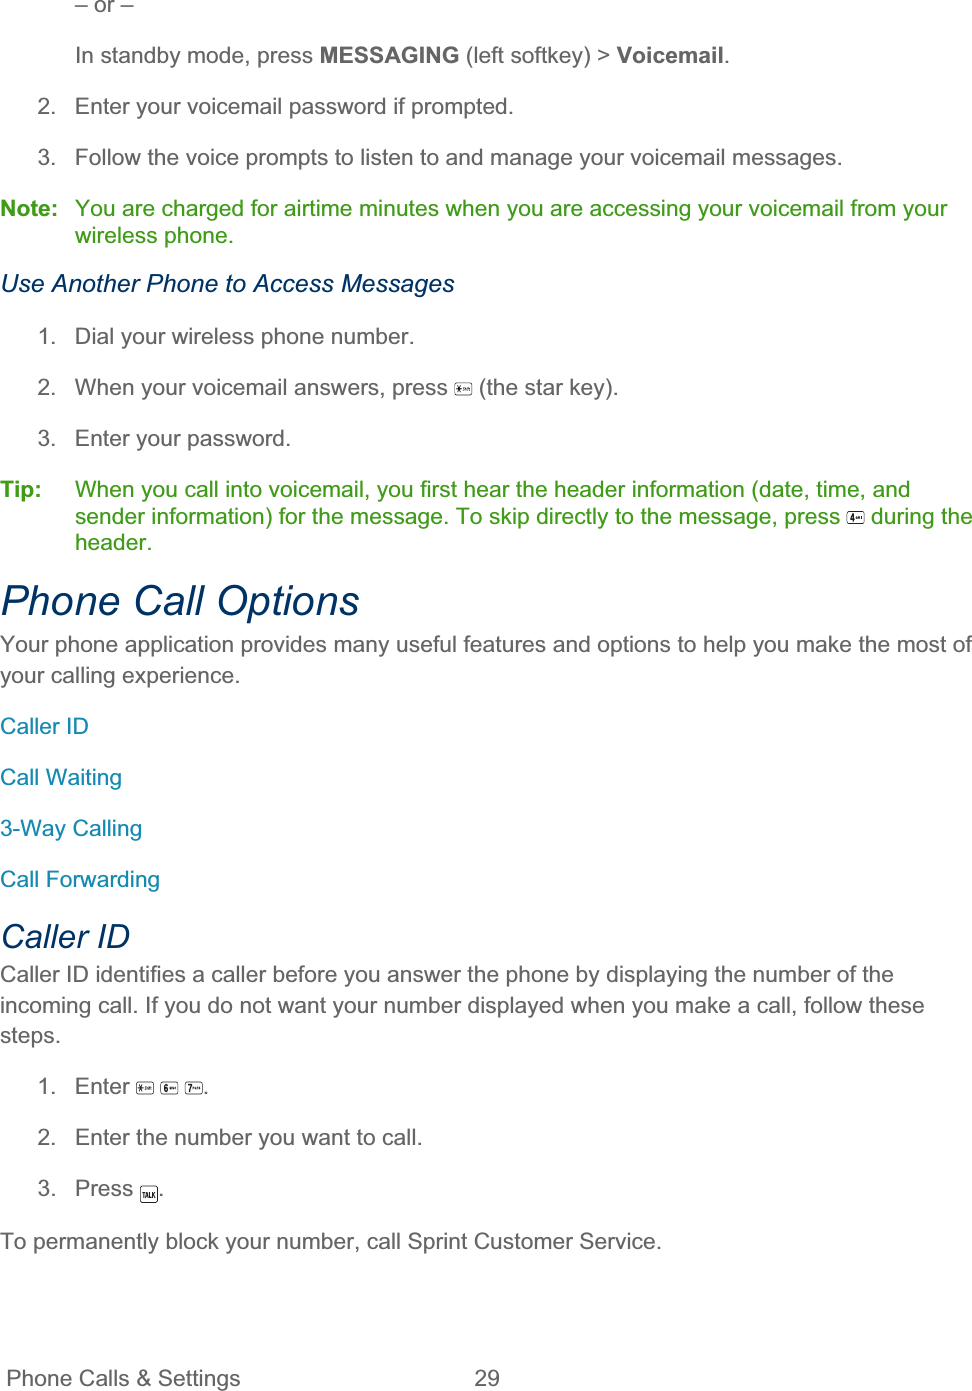 Phone Calls &amp; Settings  29   – or – In standby mode, press MESSAGING (left softkey) &gt; Voicemail.2.  Enter your voicemail password if prompted. 3.  Follow the voice prompts to listen to and manage your voicemail messages. Note:  You are charged for airtime minutes when you are accessing your voicemail from your wireless phone. Use Another Phone to Access Messages 1.  Dial your wireless phone number. 2.  When your voicemail answers, press   (the star key). 3.  Enter your password. Tip:   When you call into voicemail, you first hear the header information (date, time, and sender information) for the message. To skip directly to the message, press   during the header.Phone Call Options Your phone application provides many useful features and options to help you make the most of your calling experience. Caller ID Call Waiting 3-Way Calling Call Forwarding Caller ID Caller ID identifies a caller before you answer the phone by displaying the number of the incoming call. If you do not want your number displayed when you make a call, follow these steps.1. Enter  .2.  Enter the number you want to call. 3. Press  .To permanently block your number, call Sprint Customer Service. 